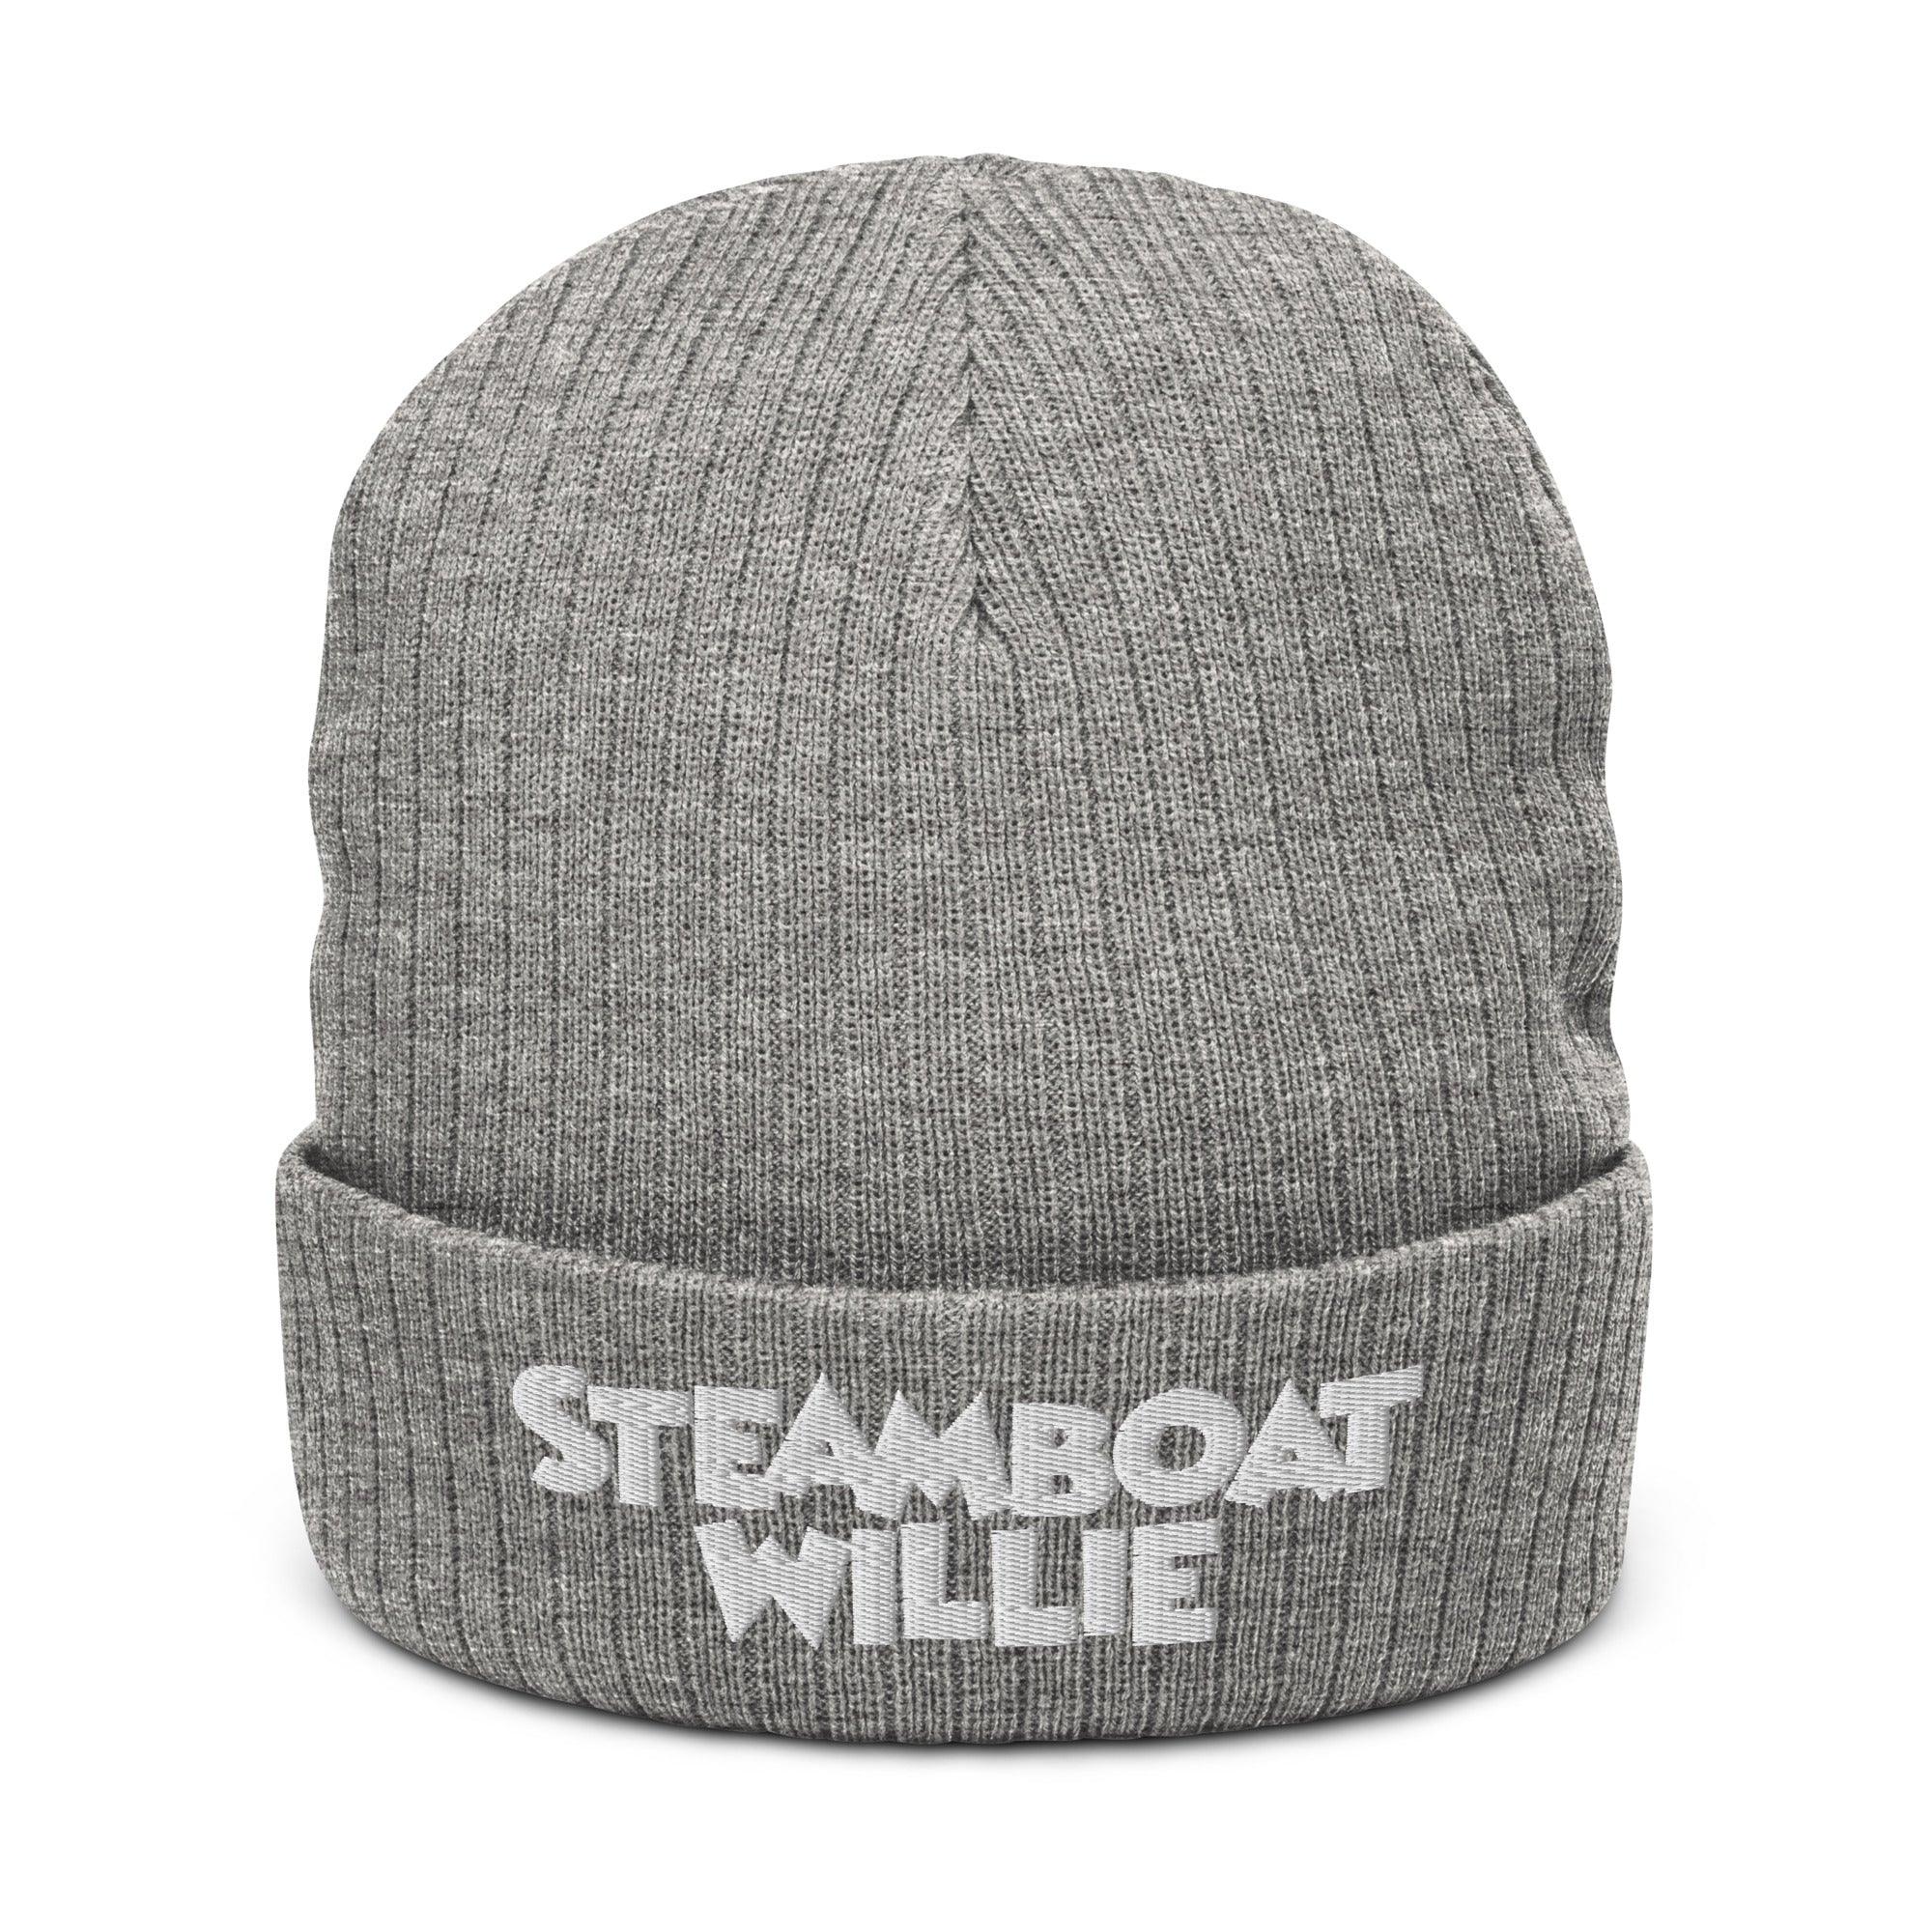 Steamboat Willie Ribbed Knit Beanie - Steamboat Willie World